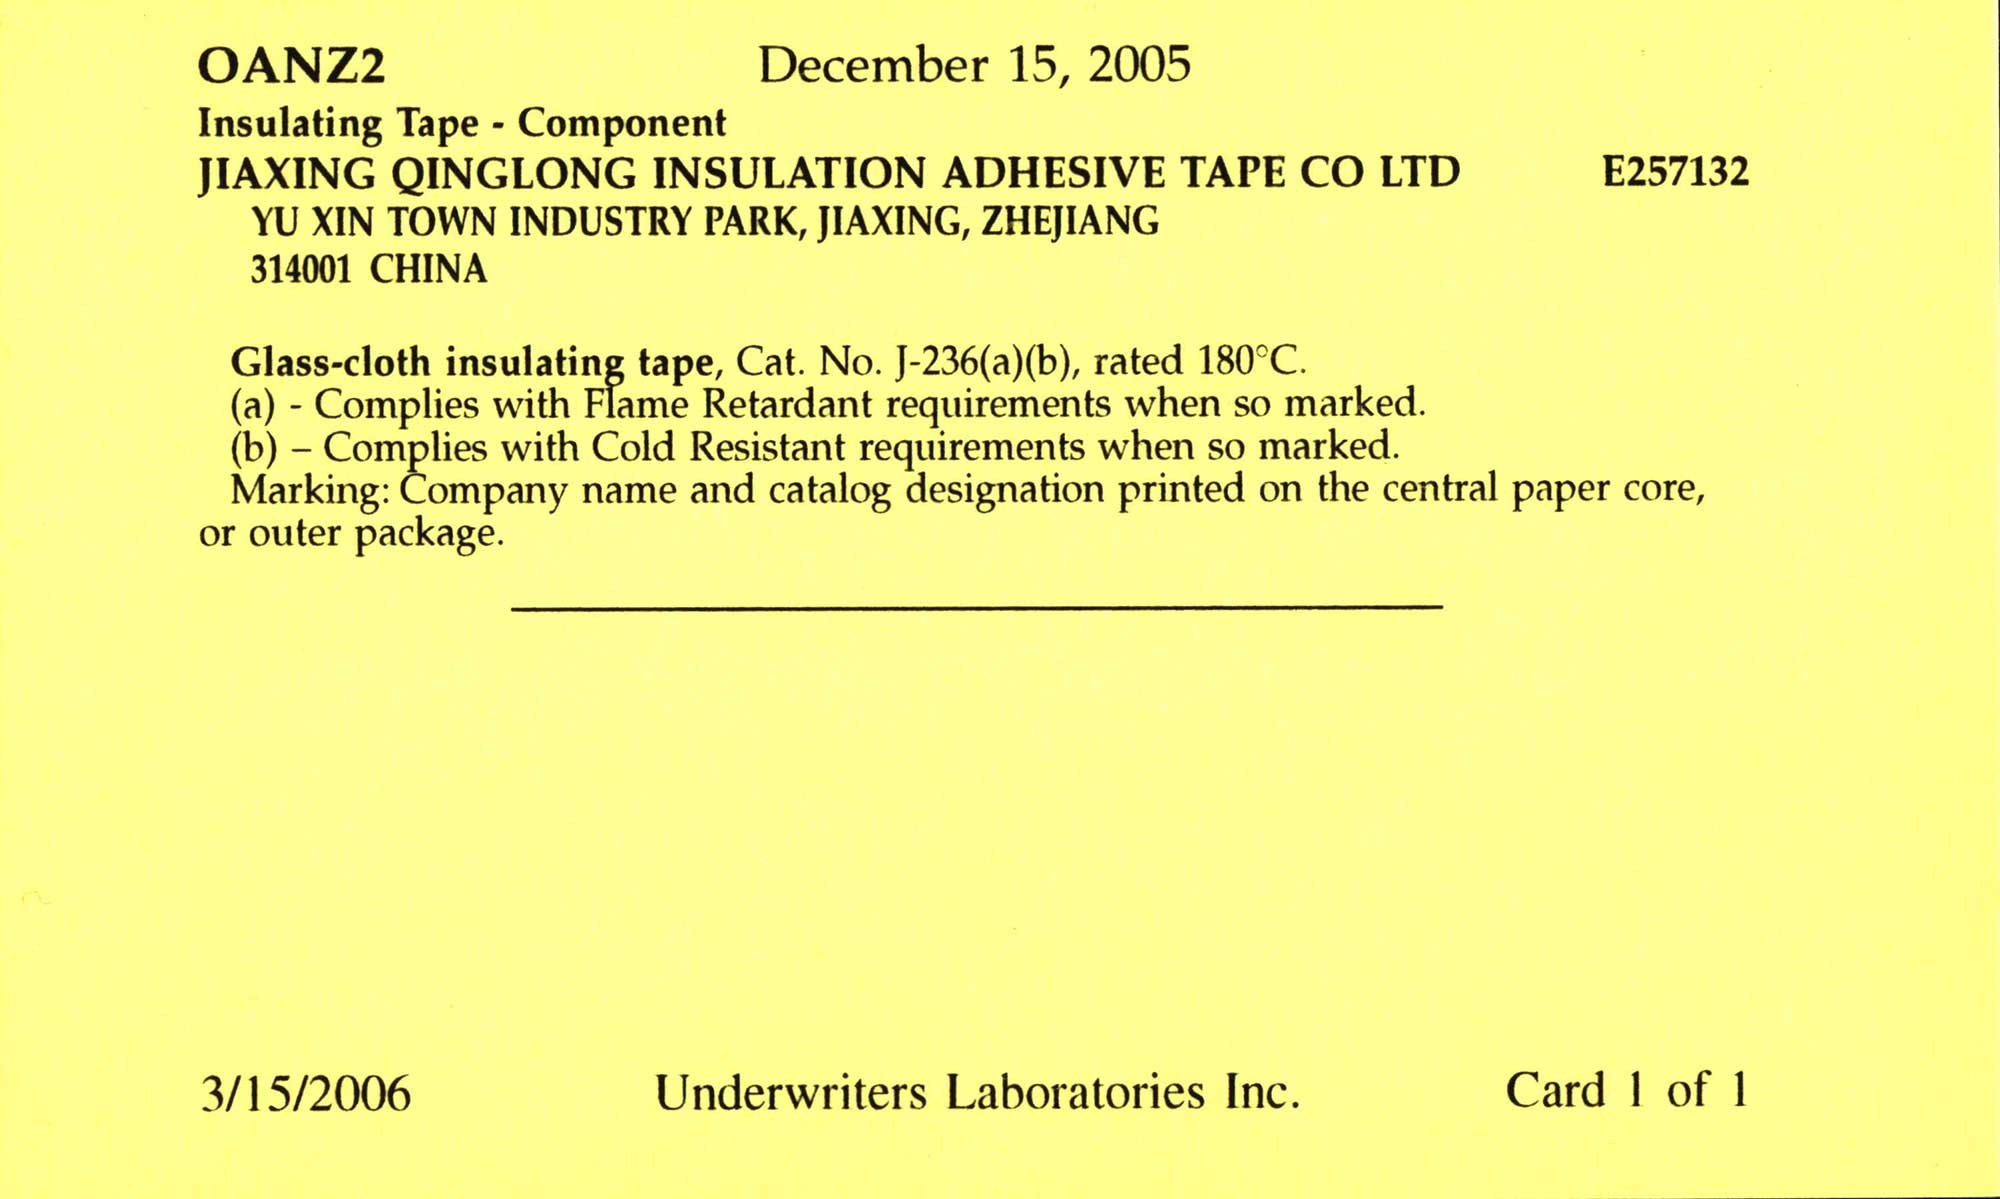 J-236 glass cloth adhesive tapes passed UL certification